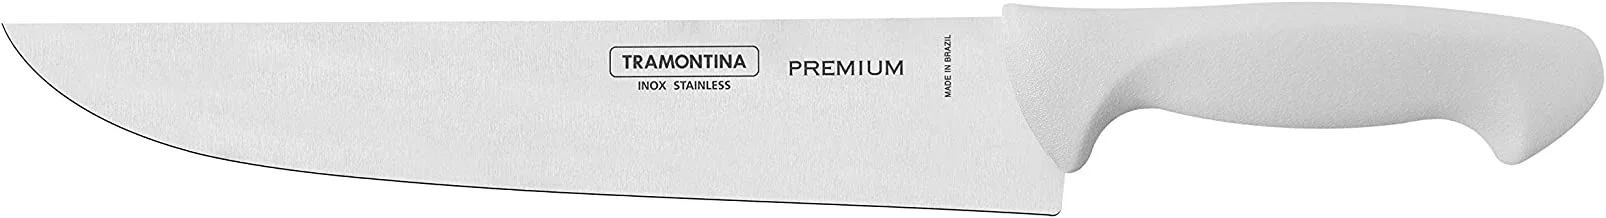 Tramontina Premium 10 Inches Kitchen Knife with Stainless Steel Blade and White Polypropylene Handle